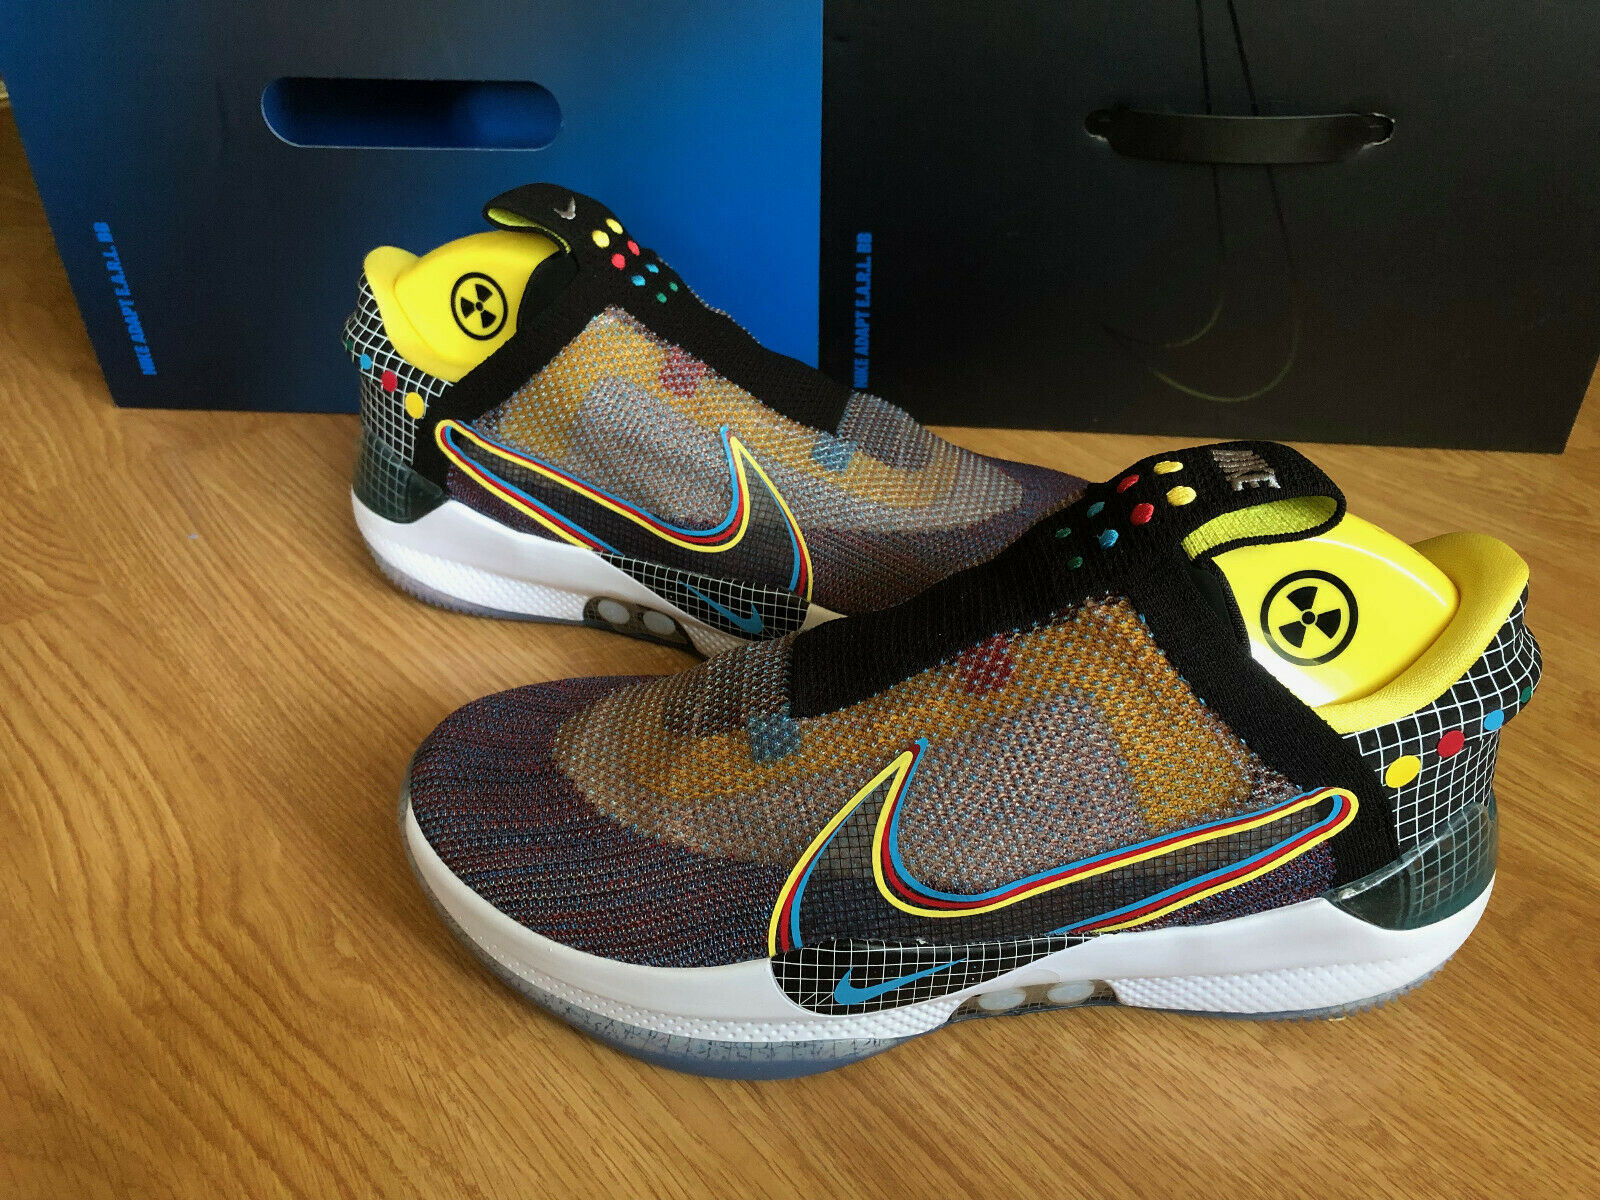 Nike Adapt BB Multi Color US Charger